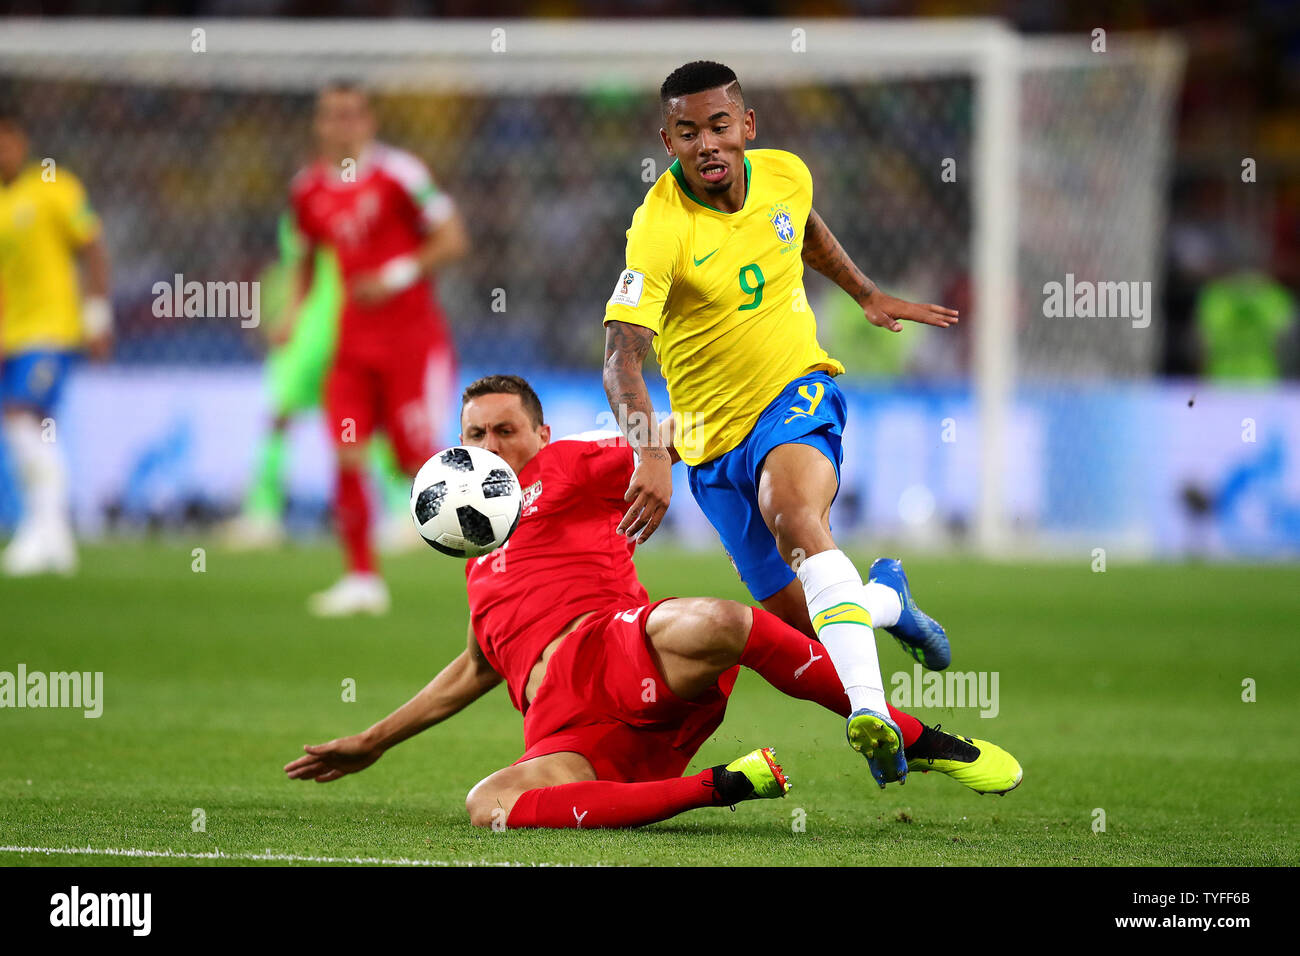 Gabriel Jesus (L) of Brazil is challenged by Nemanja Matic of Serbia during the 2018 FIFA World Cup Group E match at Spartak Stadium in Moscow, Russia on June 27, 2018. Brazil beat Serbia 2-0 to qualify for the round of 16. Photo by Chris Brunskill/UPI Stock Photo